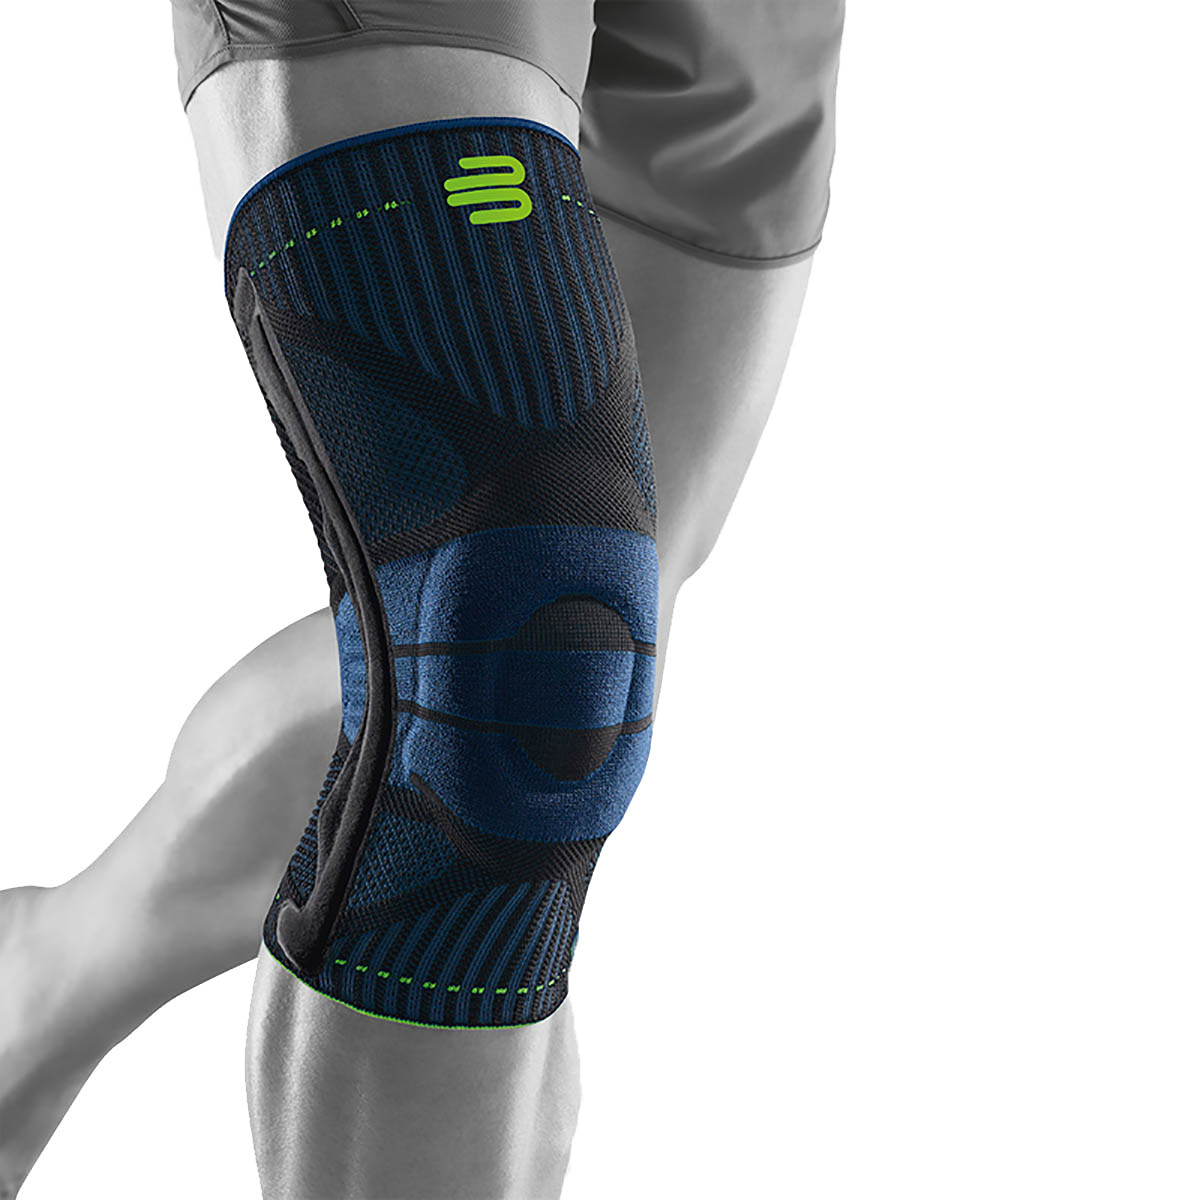 Bauerfeind Sports Knee Support, , large image number null